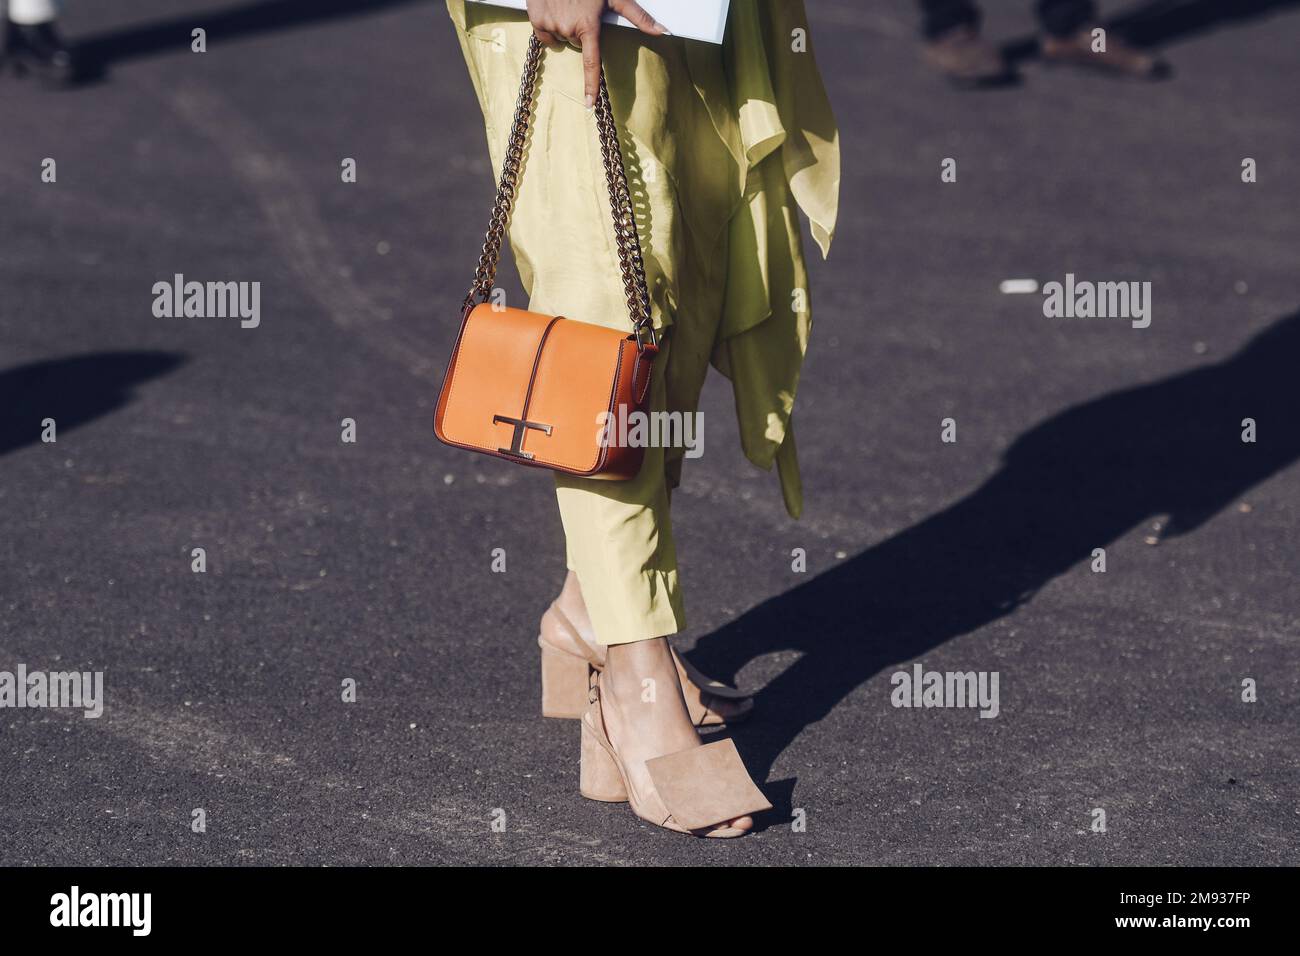 Milan, Italy - February 26, 2022: Female in stylish bright yellow asymmetrical pants with orange bag and beige sandals. Stock Photo